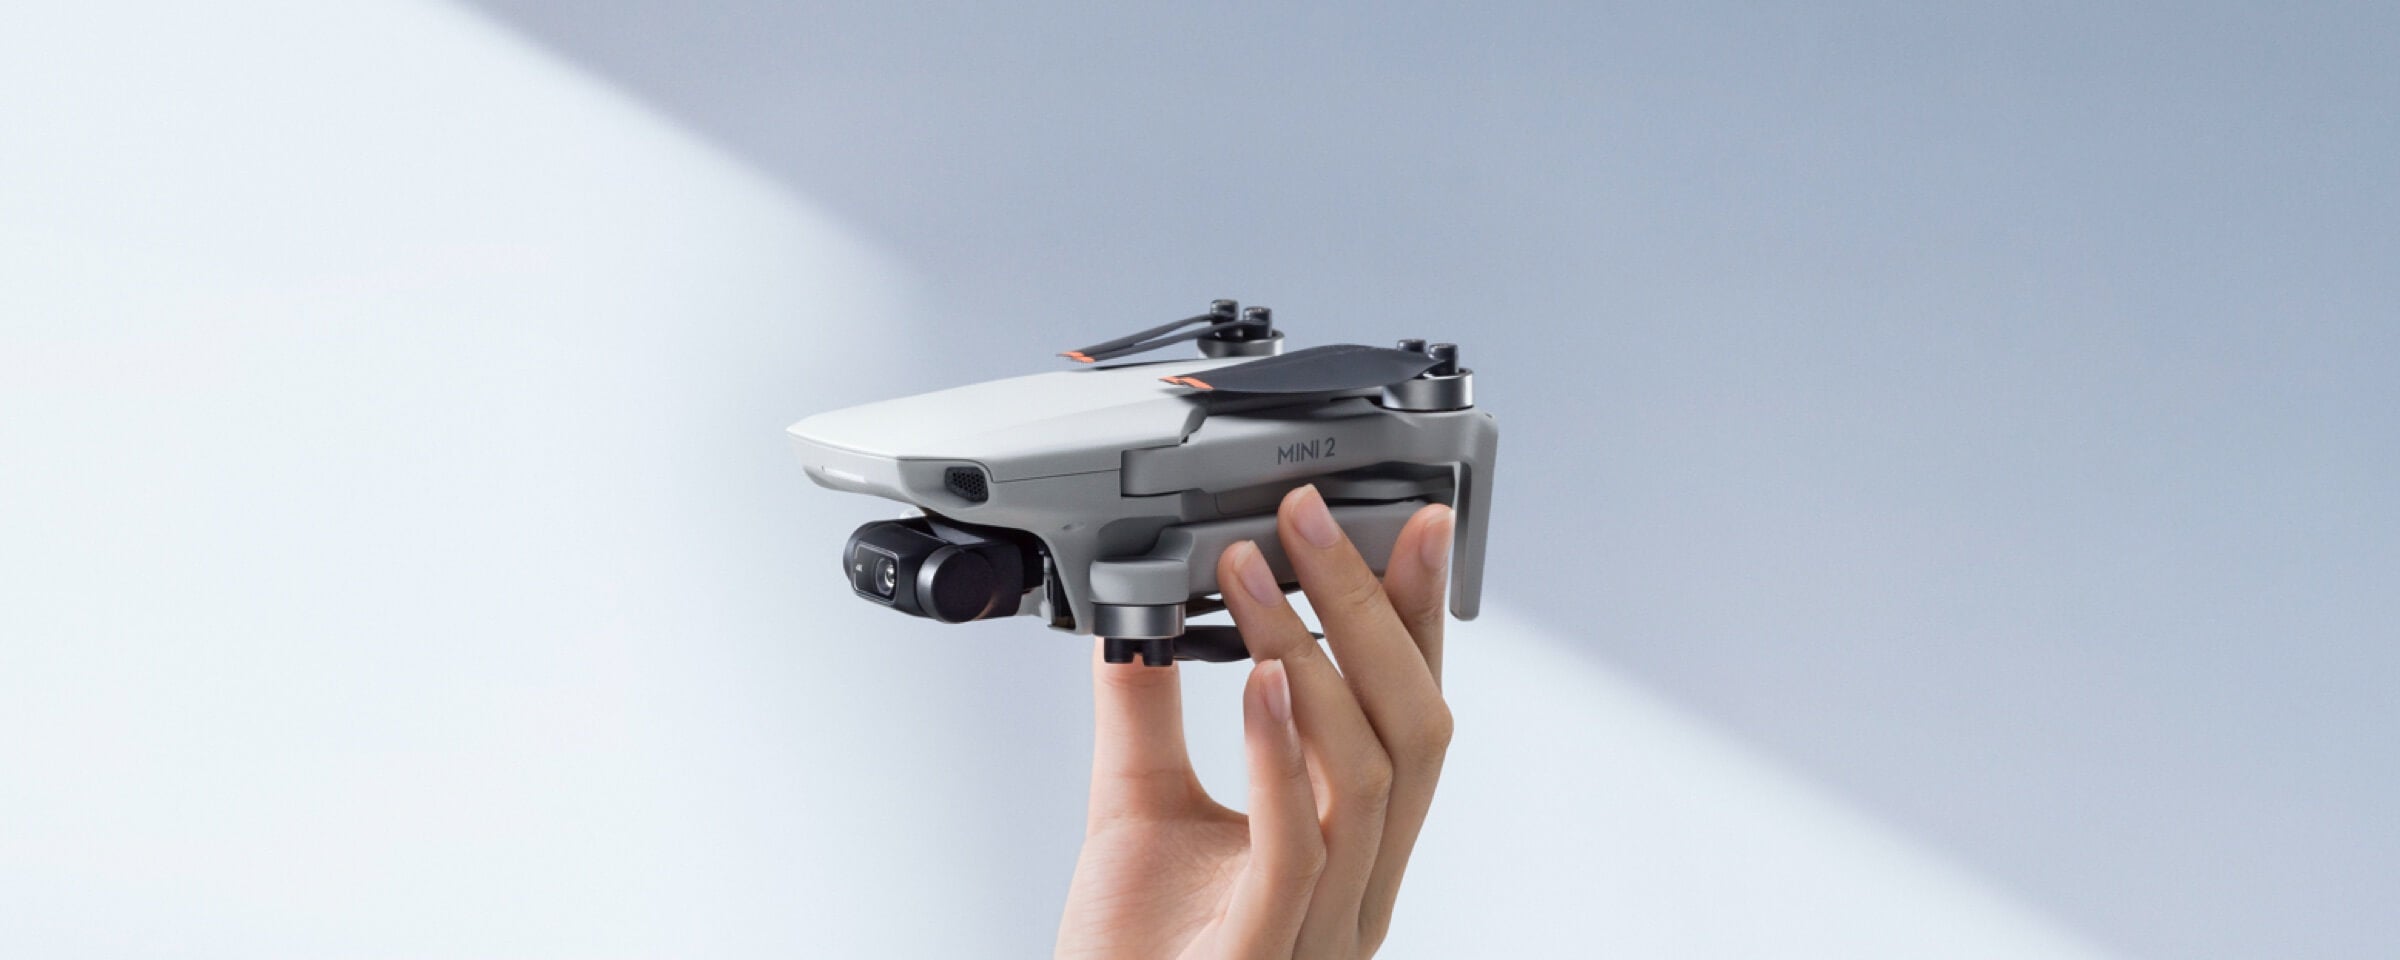 DJI Mini 2 – 3-Axis Gimbal with 4K HD Camera, mini 2 can resist level 5 winds and take off at a max altitude of 4,000